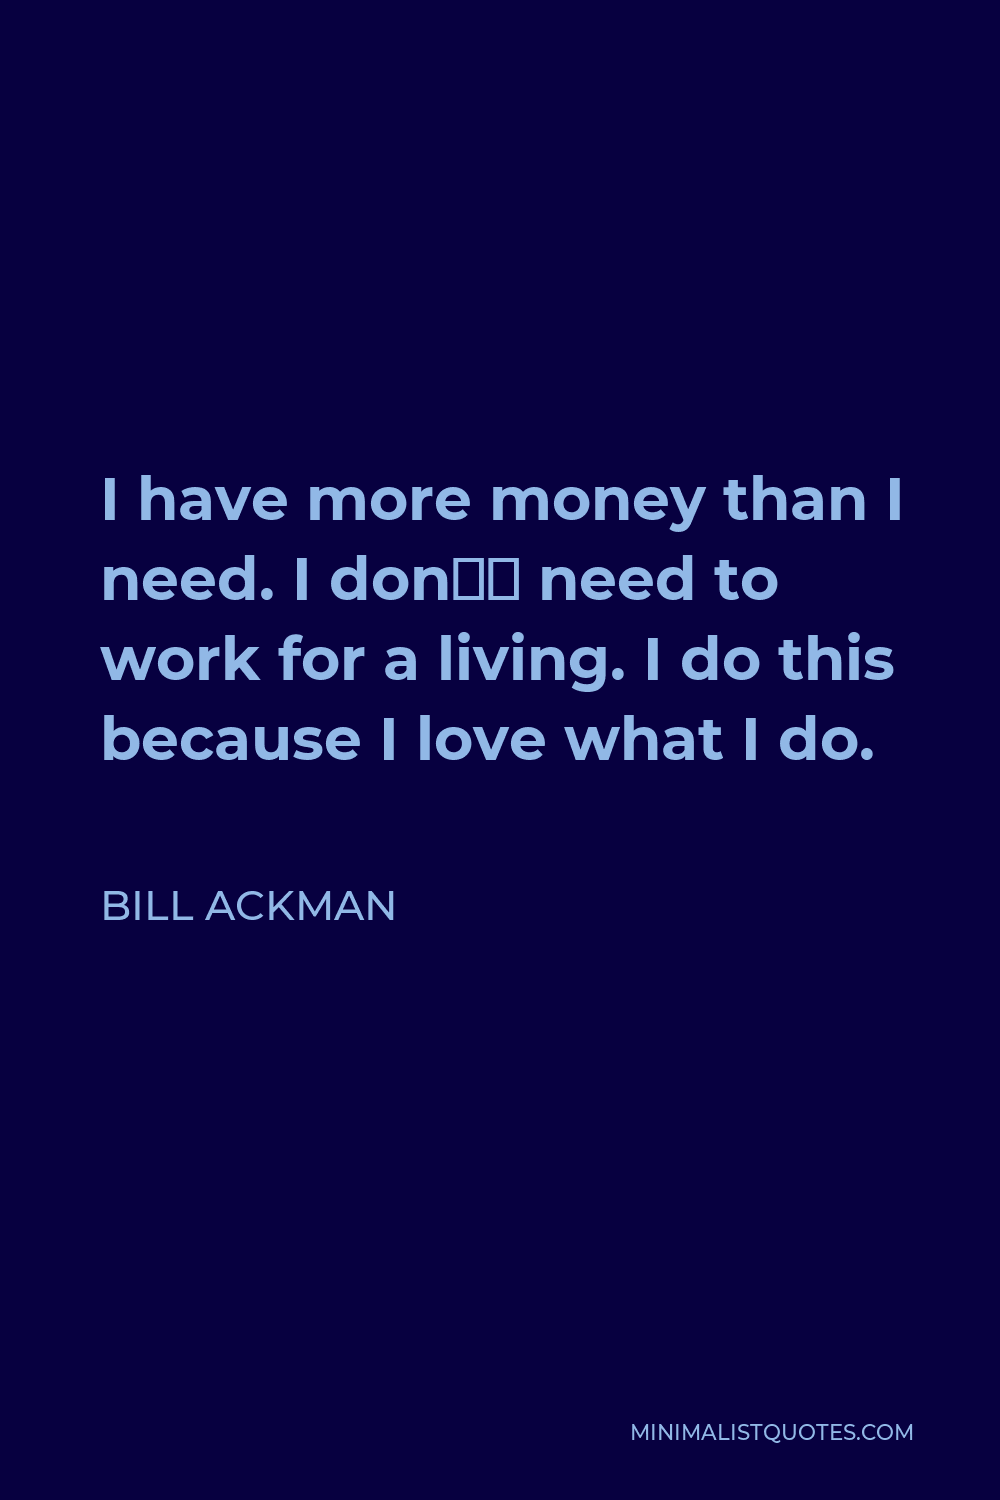 Bill Ackman Quote - I have more money than I need. I don’t need to work for a living. I do this because I love what I do.